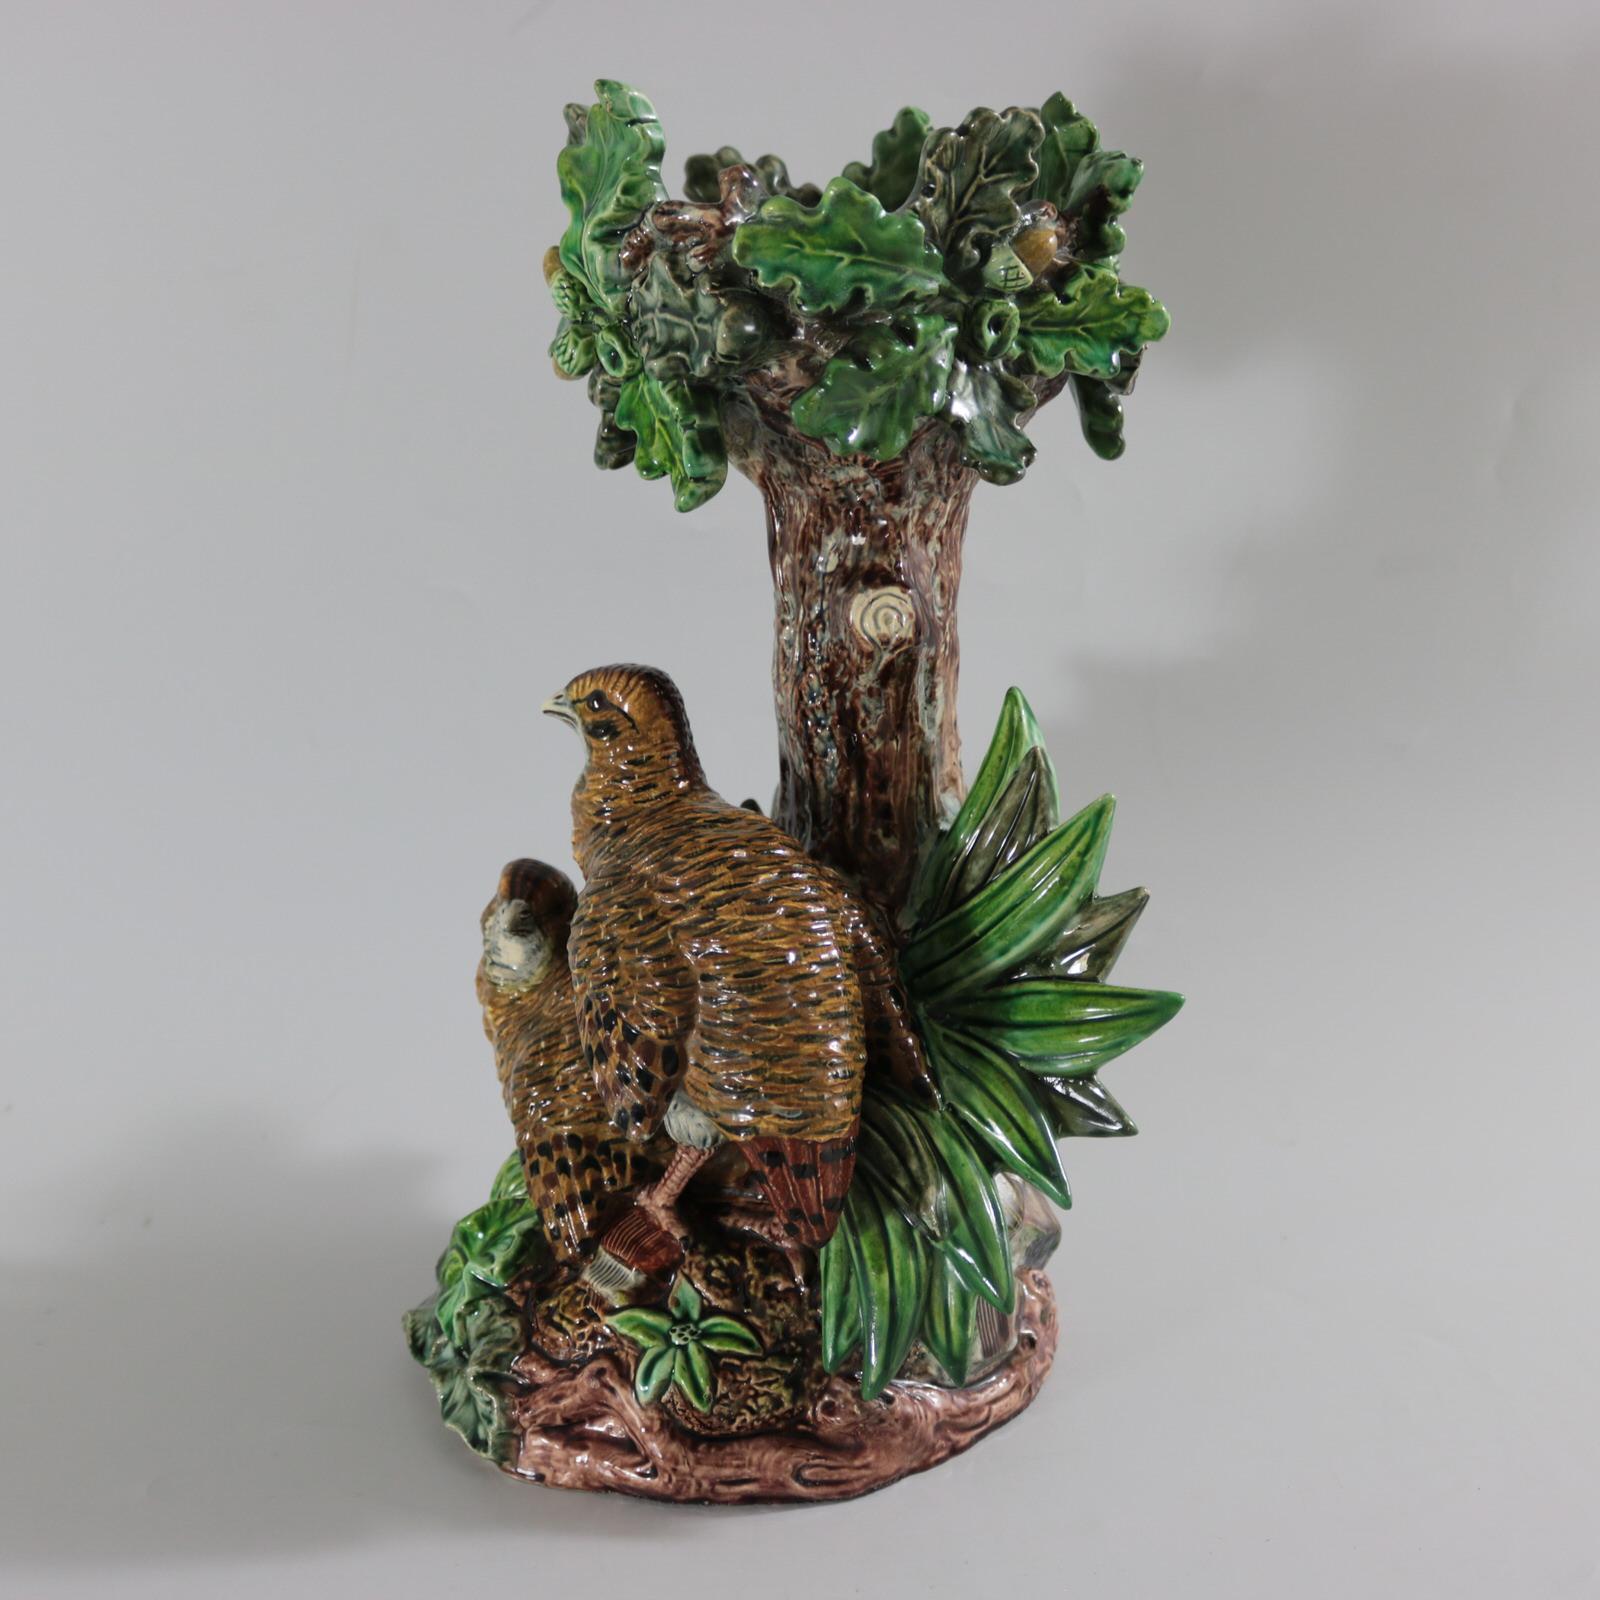 Lonitz Majolica cache pot stand which features partridges in front of reeds and an oak tree. Colouration: green, grey, brown, are predominant. The piece bears maker's marks for the Lonitz pottery. Bears a pattern number, '1204'.